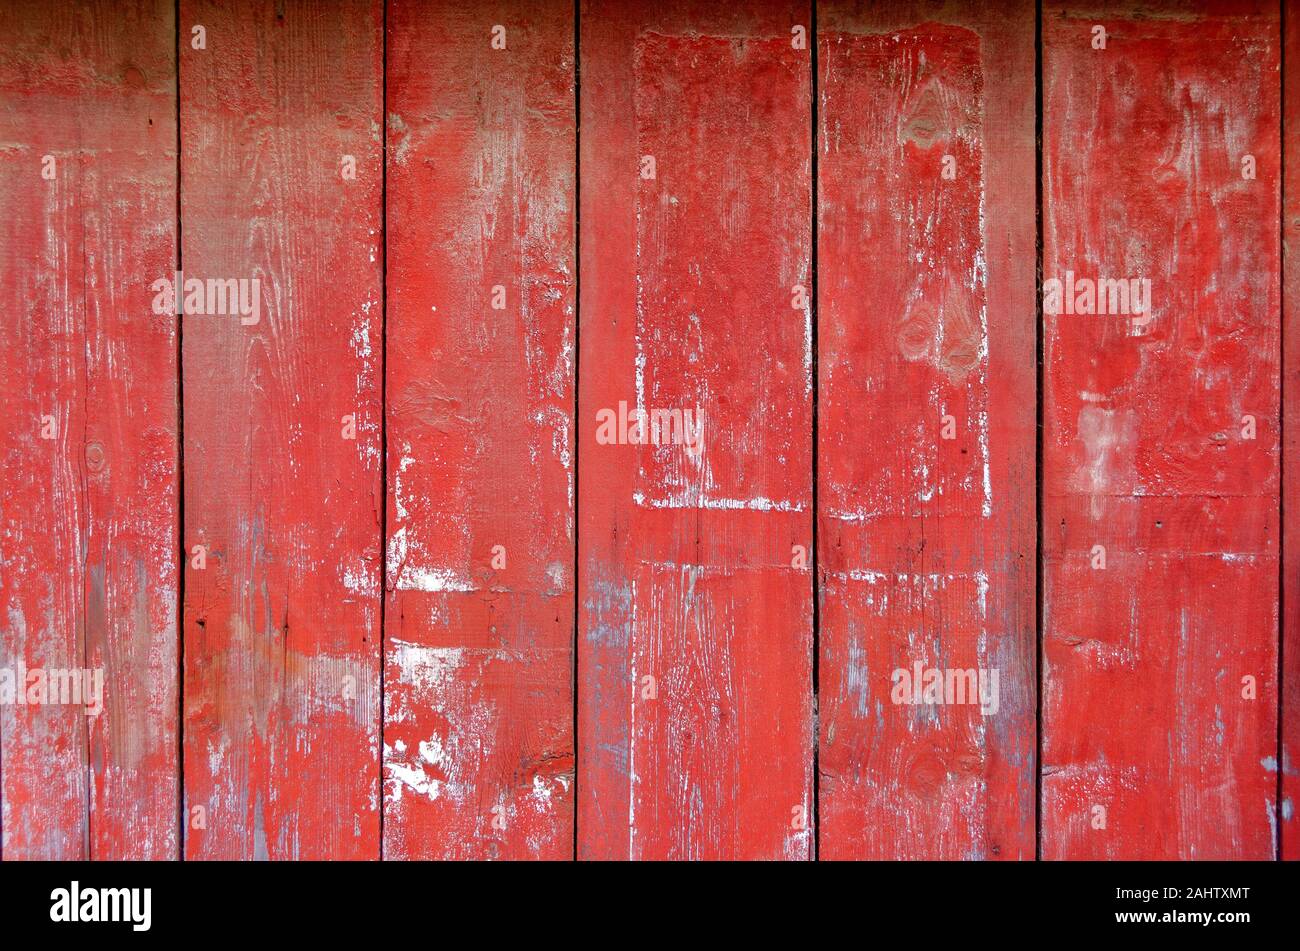 wooden wall made from upright old falu-red painted planks Stock Photo